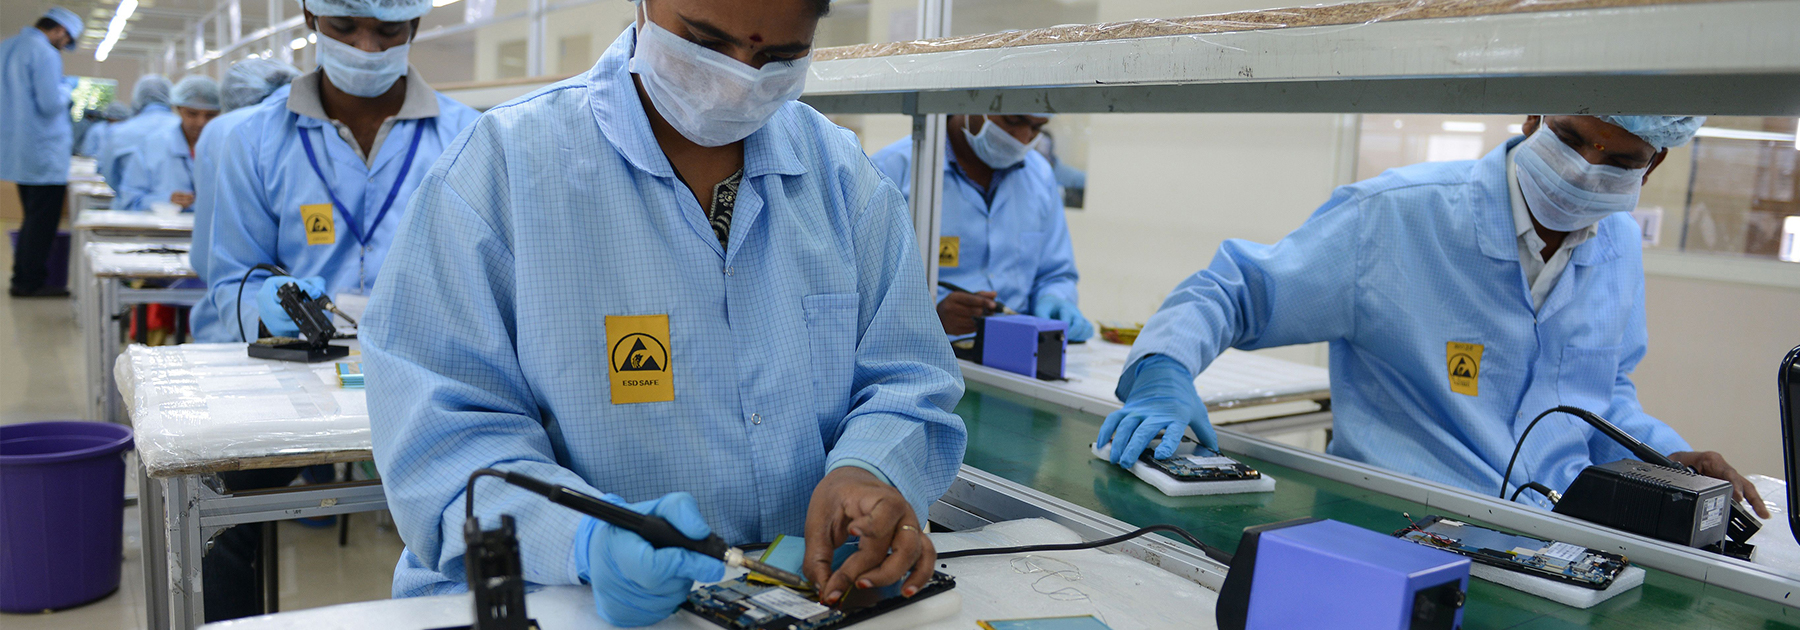 Indian technicians work on tablet computers at Canadian company Datawind Manufacturing plant. (NOAH SEELAM/AFP/Getty Images)